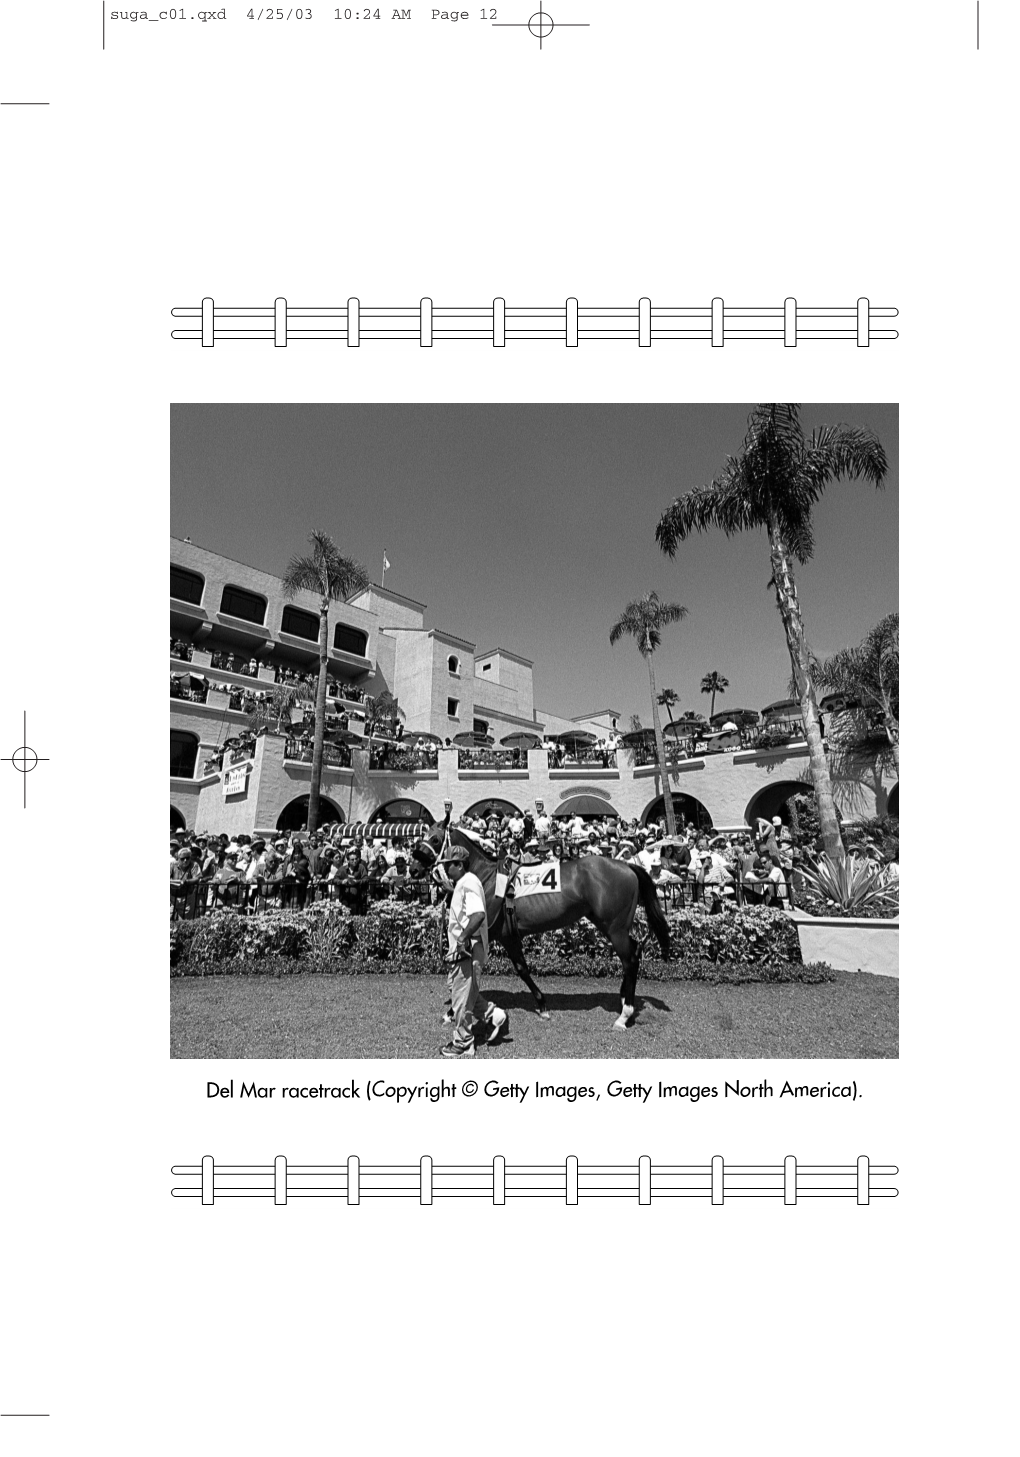 Del Mar Racetrack (Copyright © Getty Images, Getty Images North America). Suga C01.Qxd 4/25/03 10:24 AM Page 13